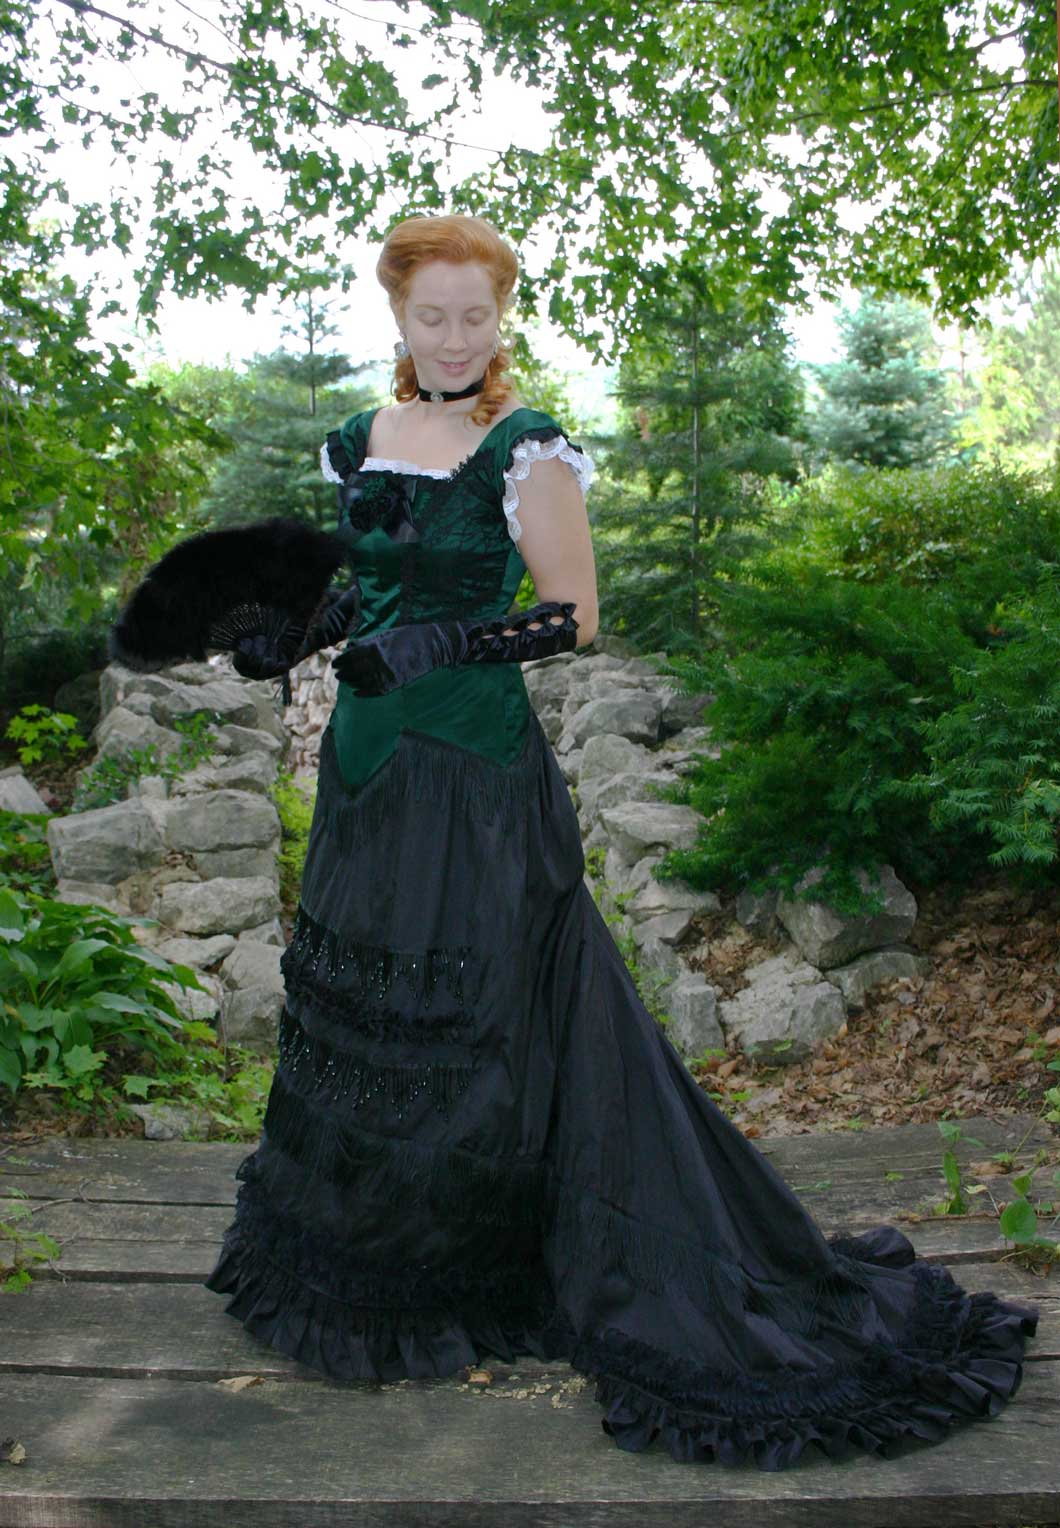 Isadore Victorian Bustle Dress